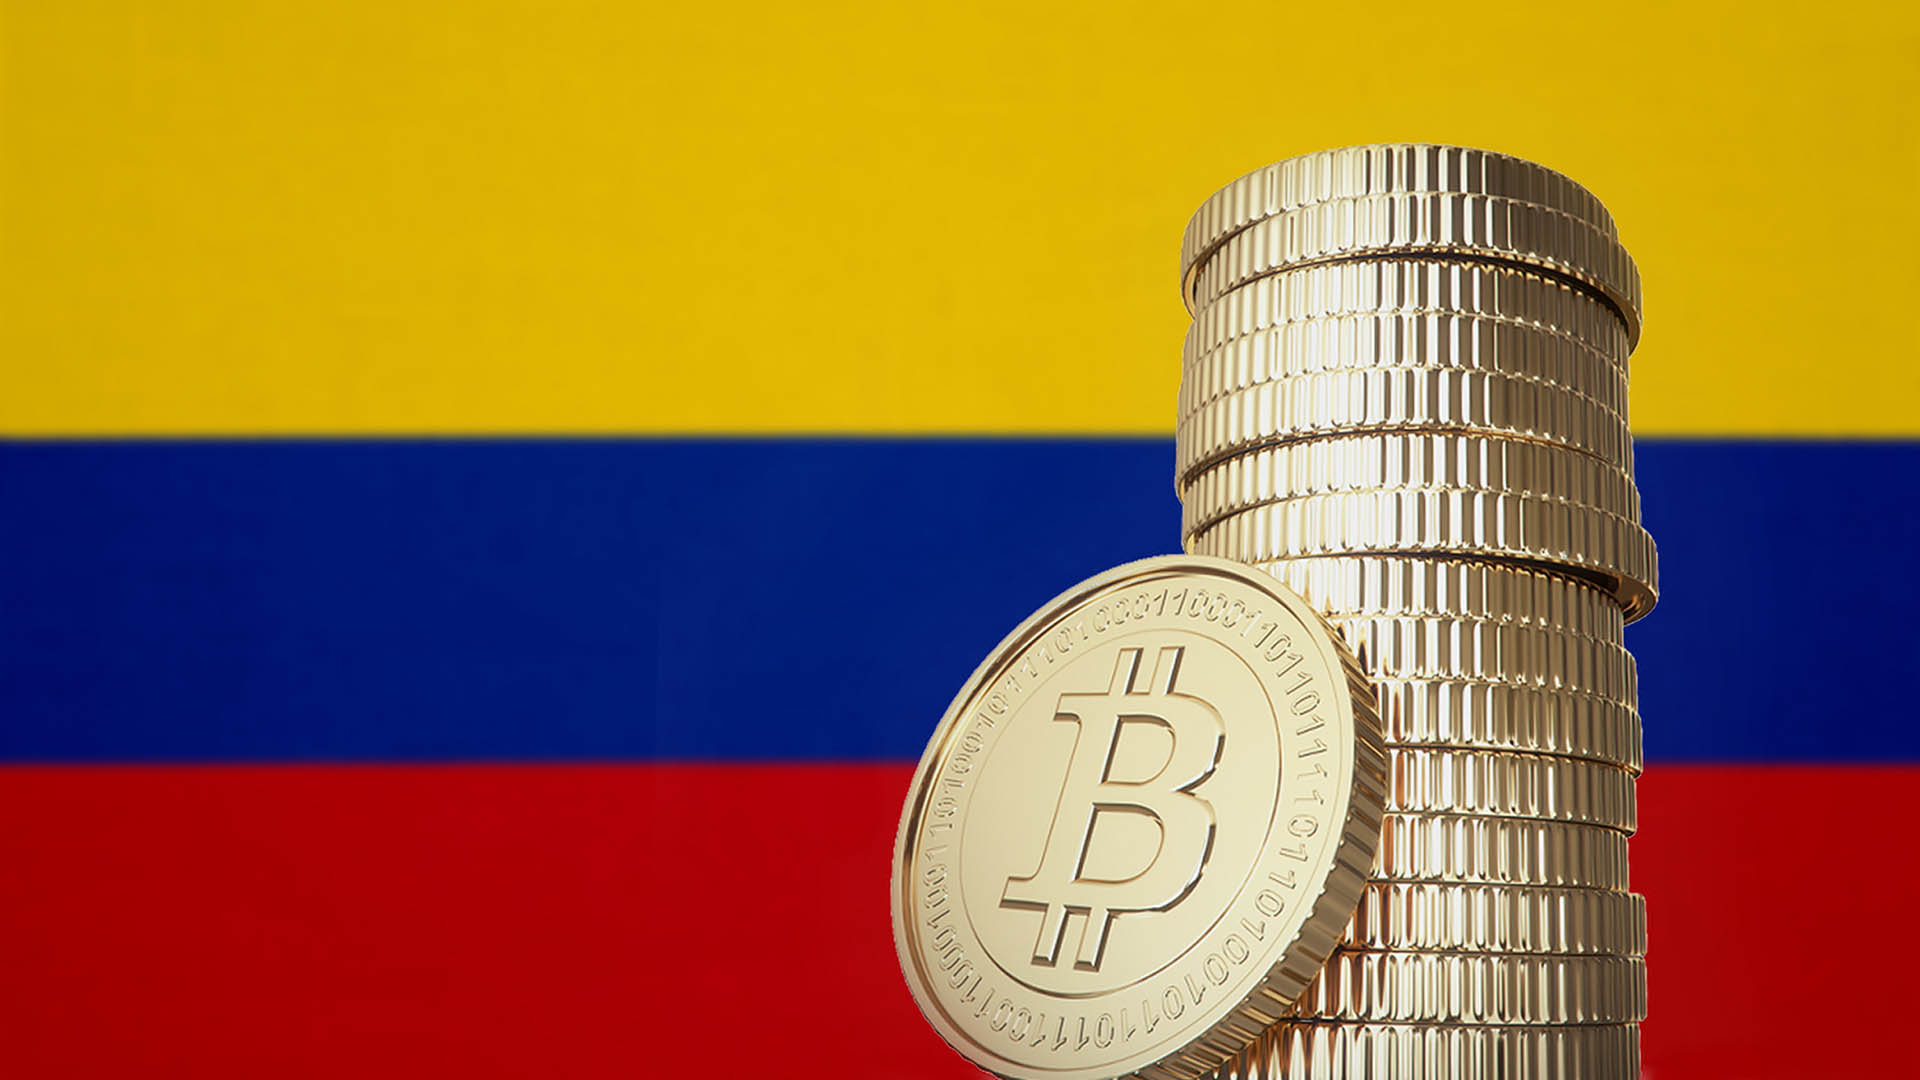 Bitcoin stack with Colombia flag in the background